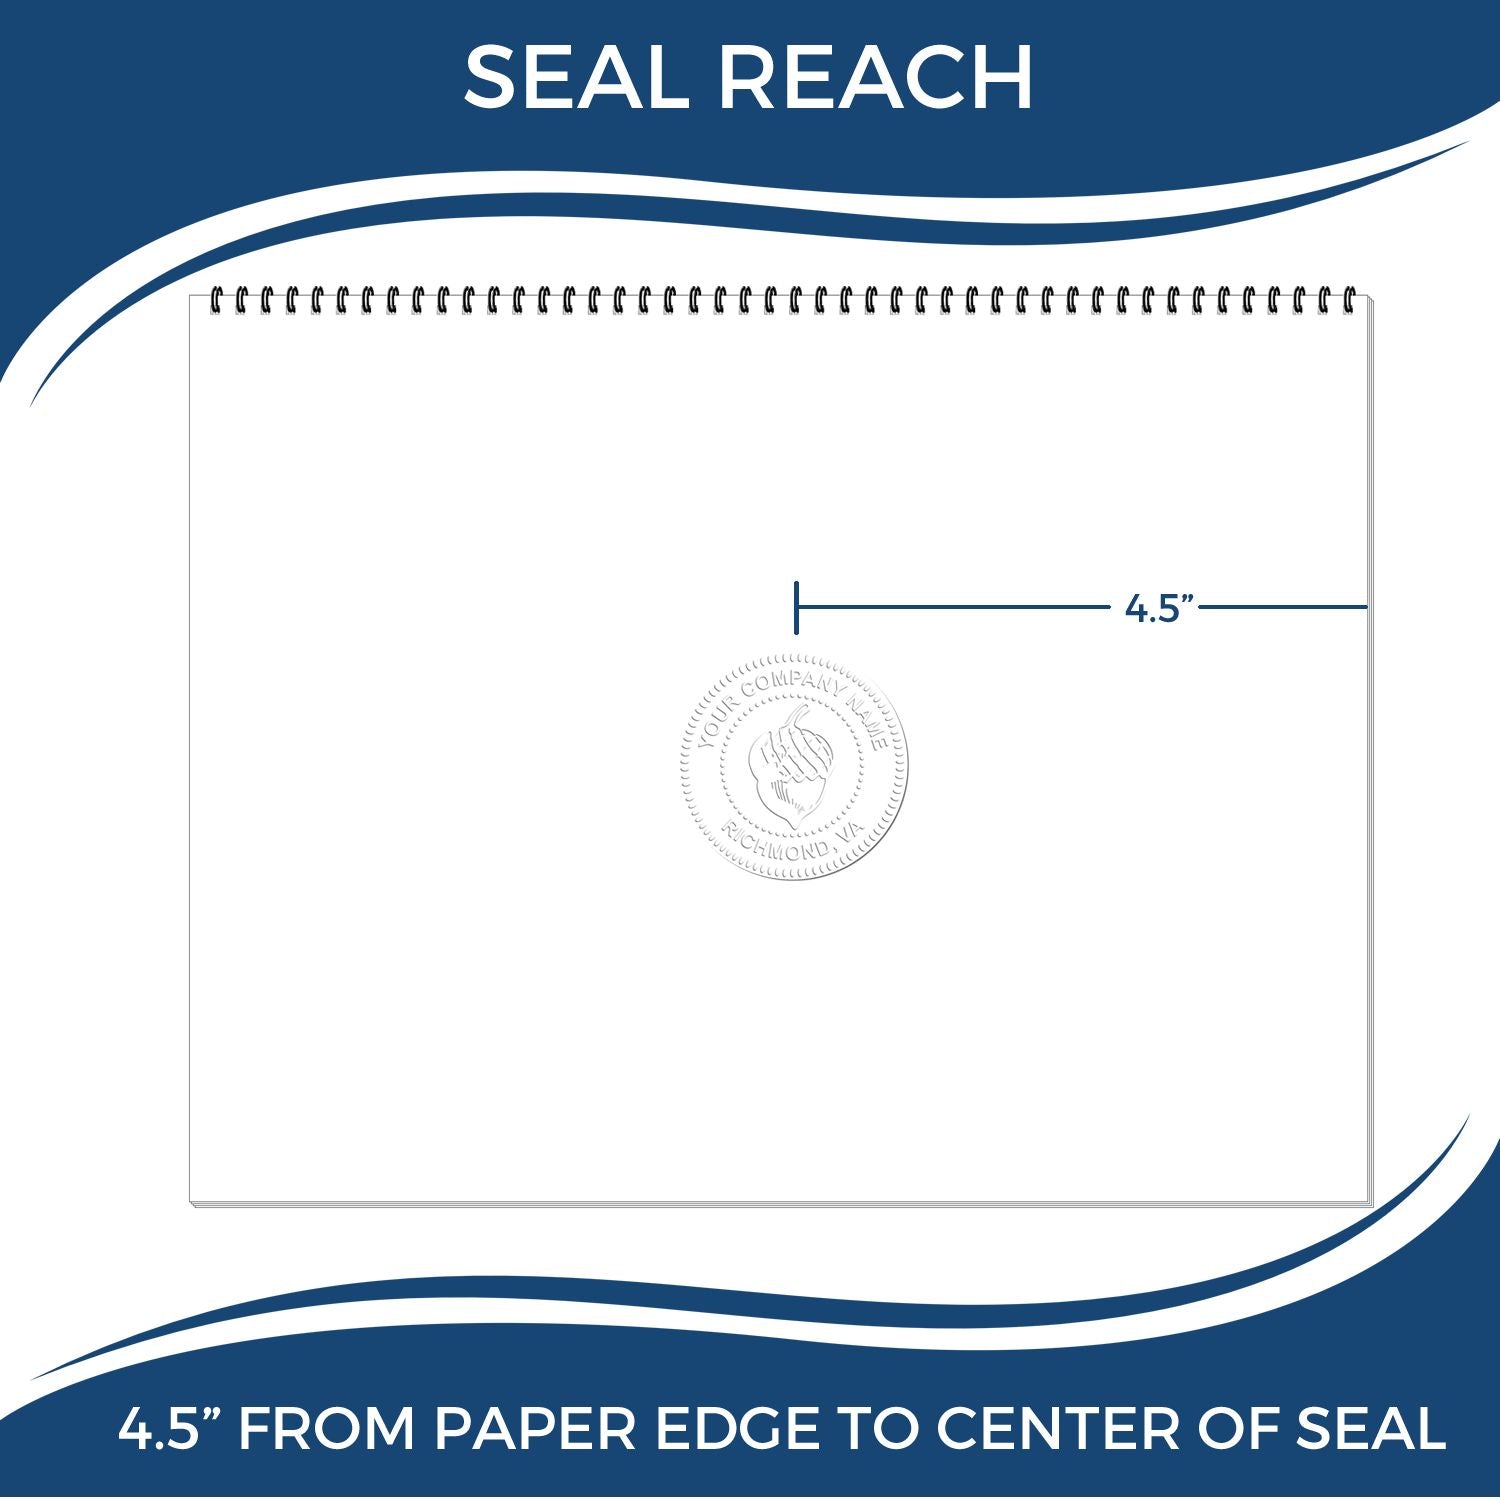 An infographic showing the seal reach which is represented by a ruler and a miniature seal image of the Extended Long Reach Virginia Surveyor Embosser